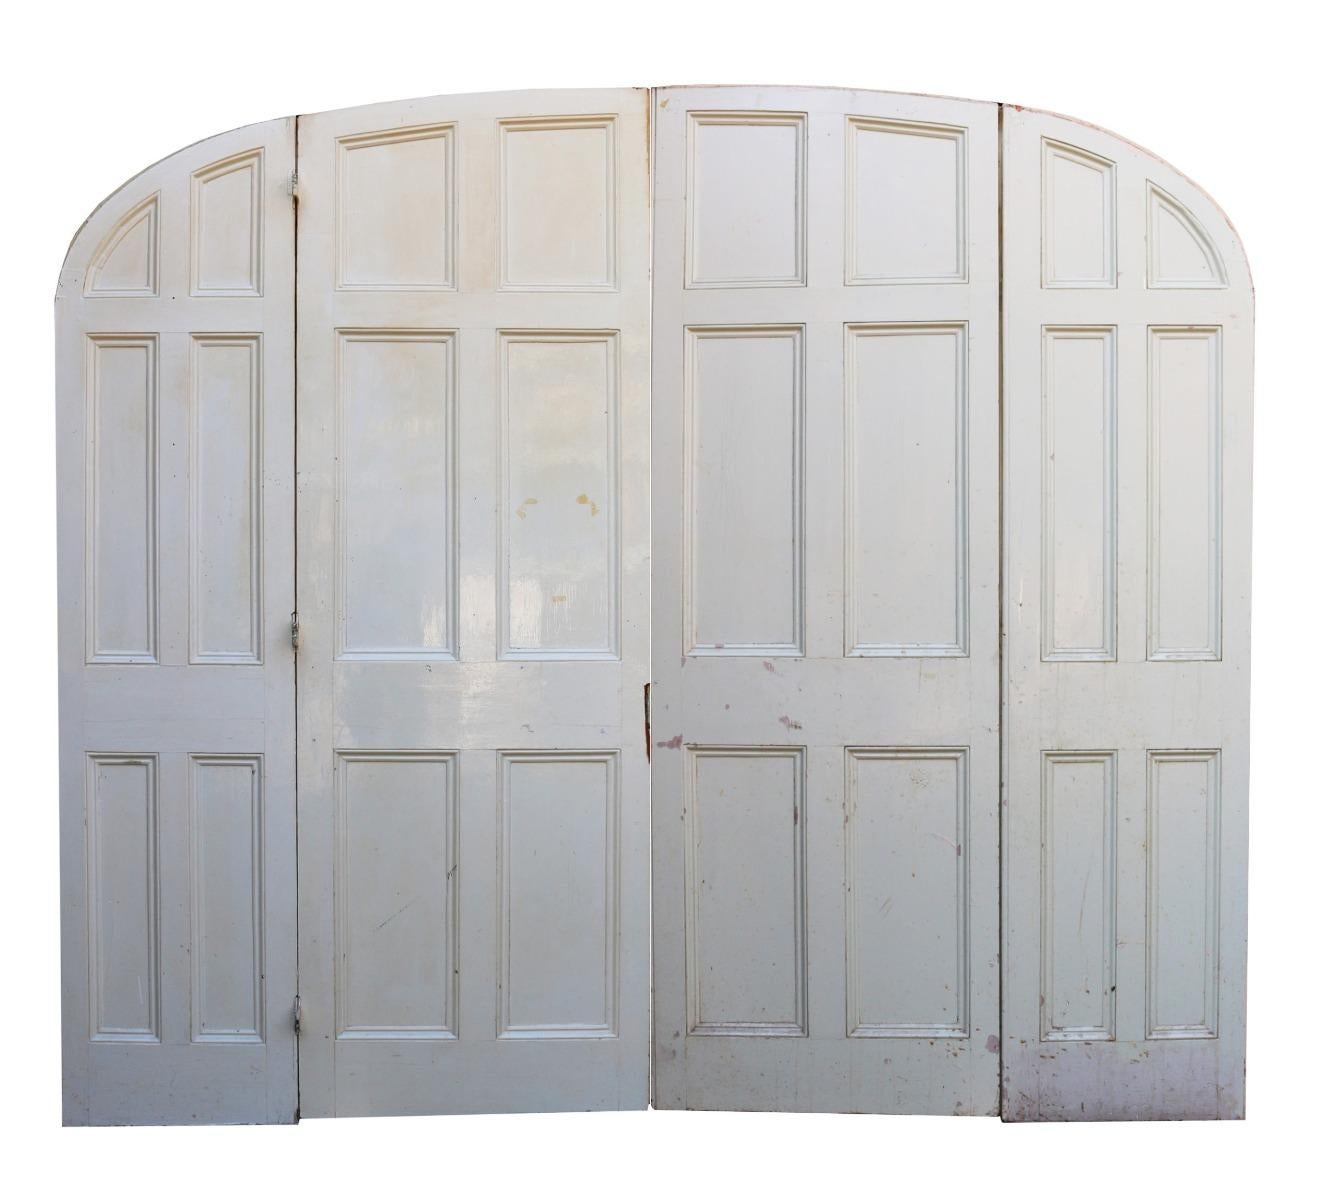 These room dividing doors were salvaged from a Victorian villa in Torquay.

Additional Dimension:

Height (Top of the arch) 241 cm

Width 281.5 cm

Thickness 4.2 cm.